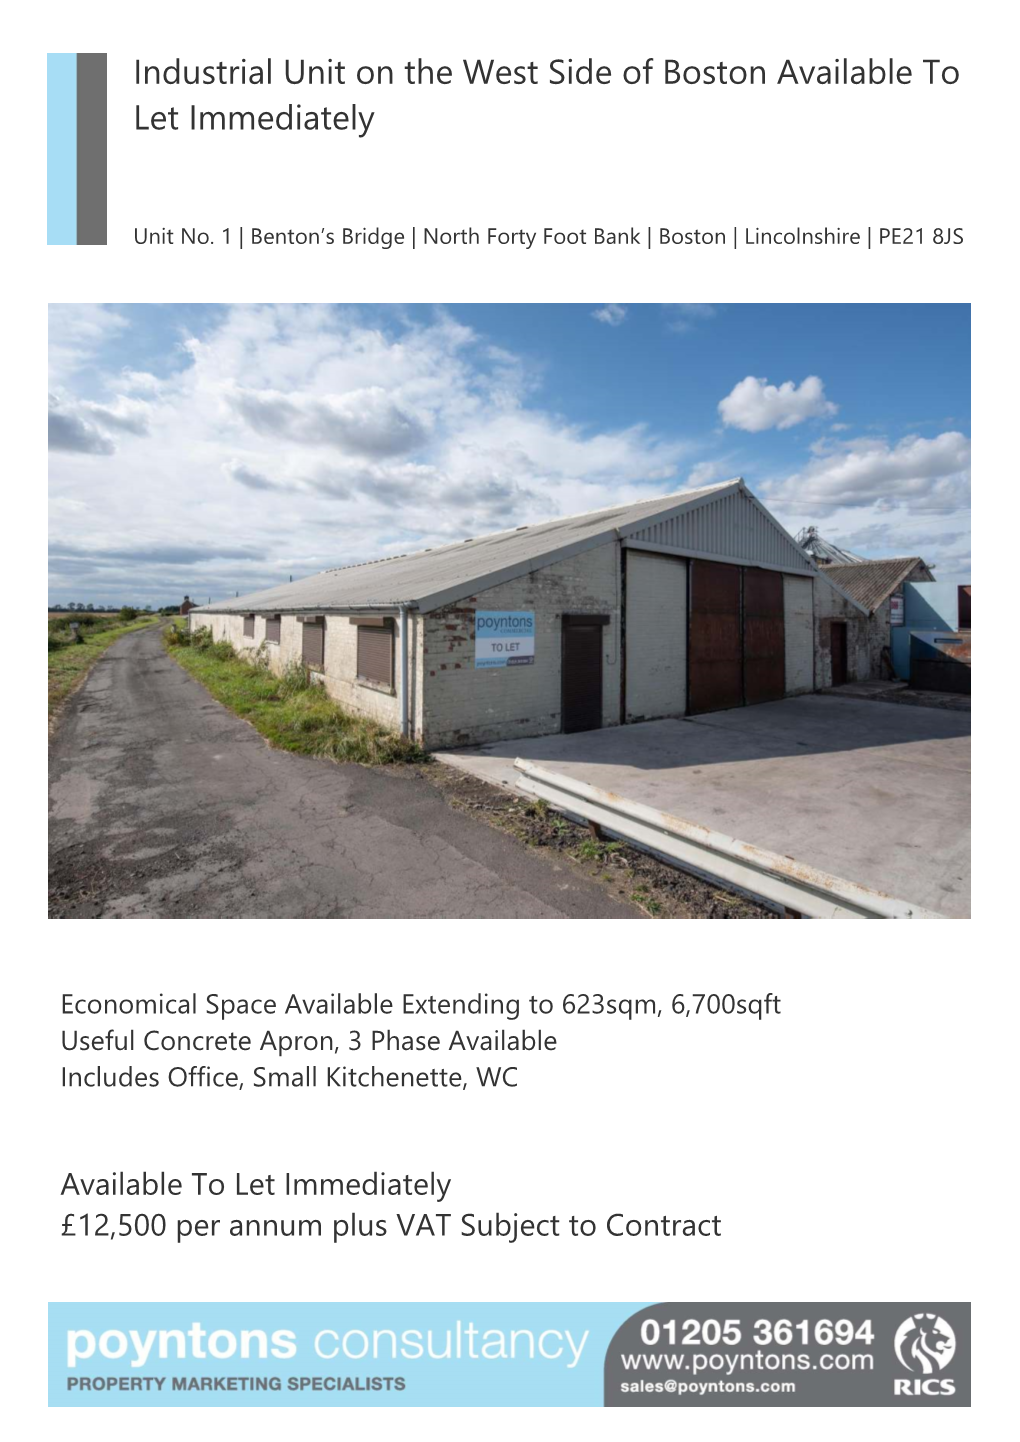 Industrial Unit on the West Side of Boston Available to Let Immediately